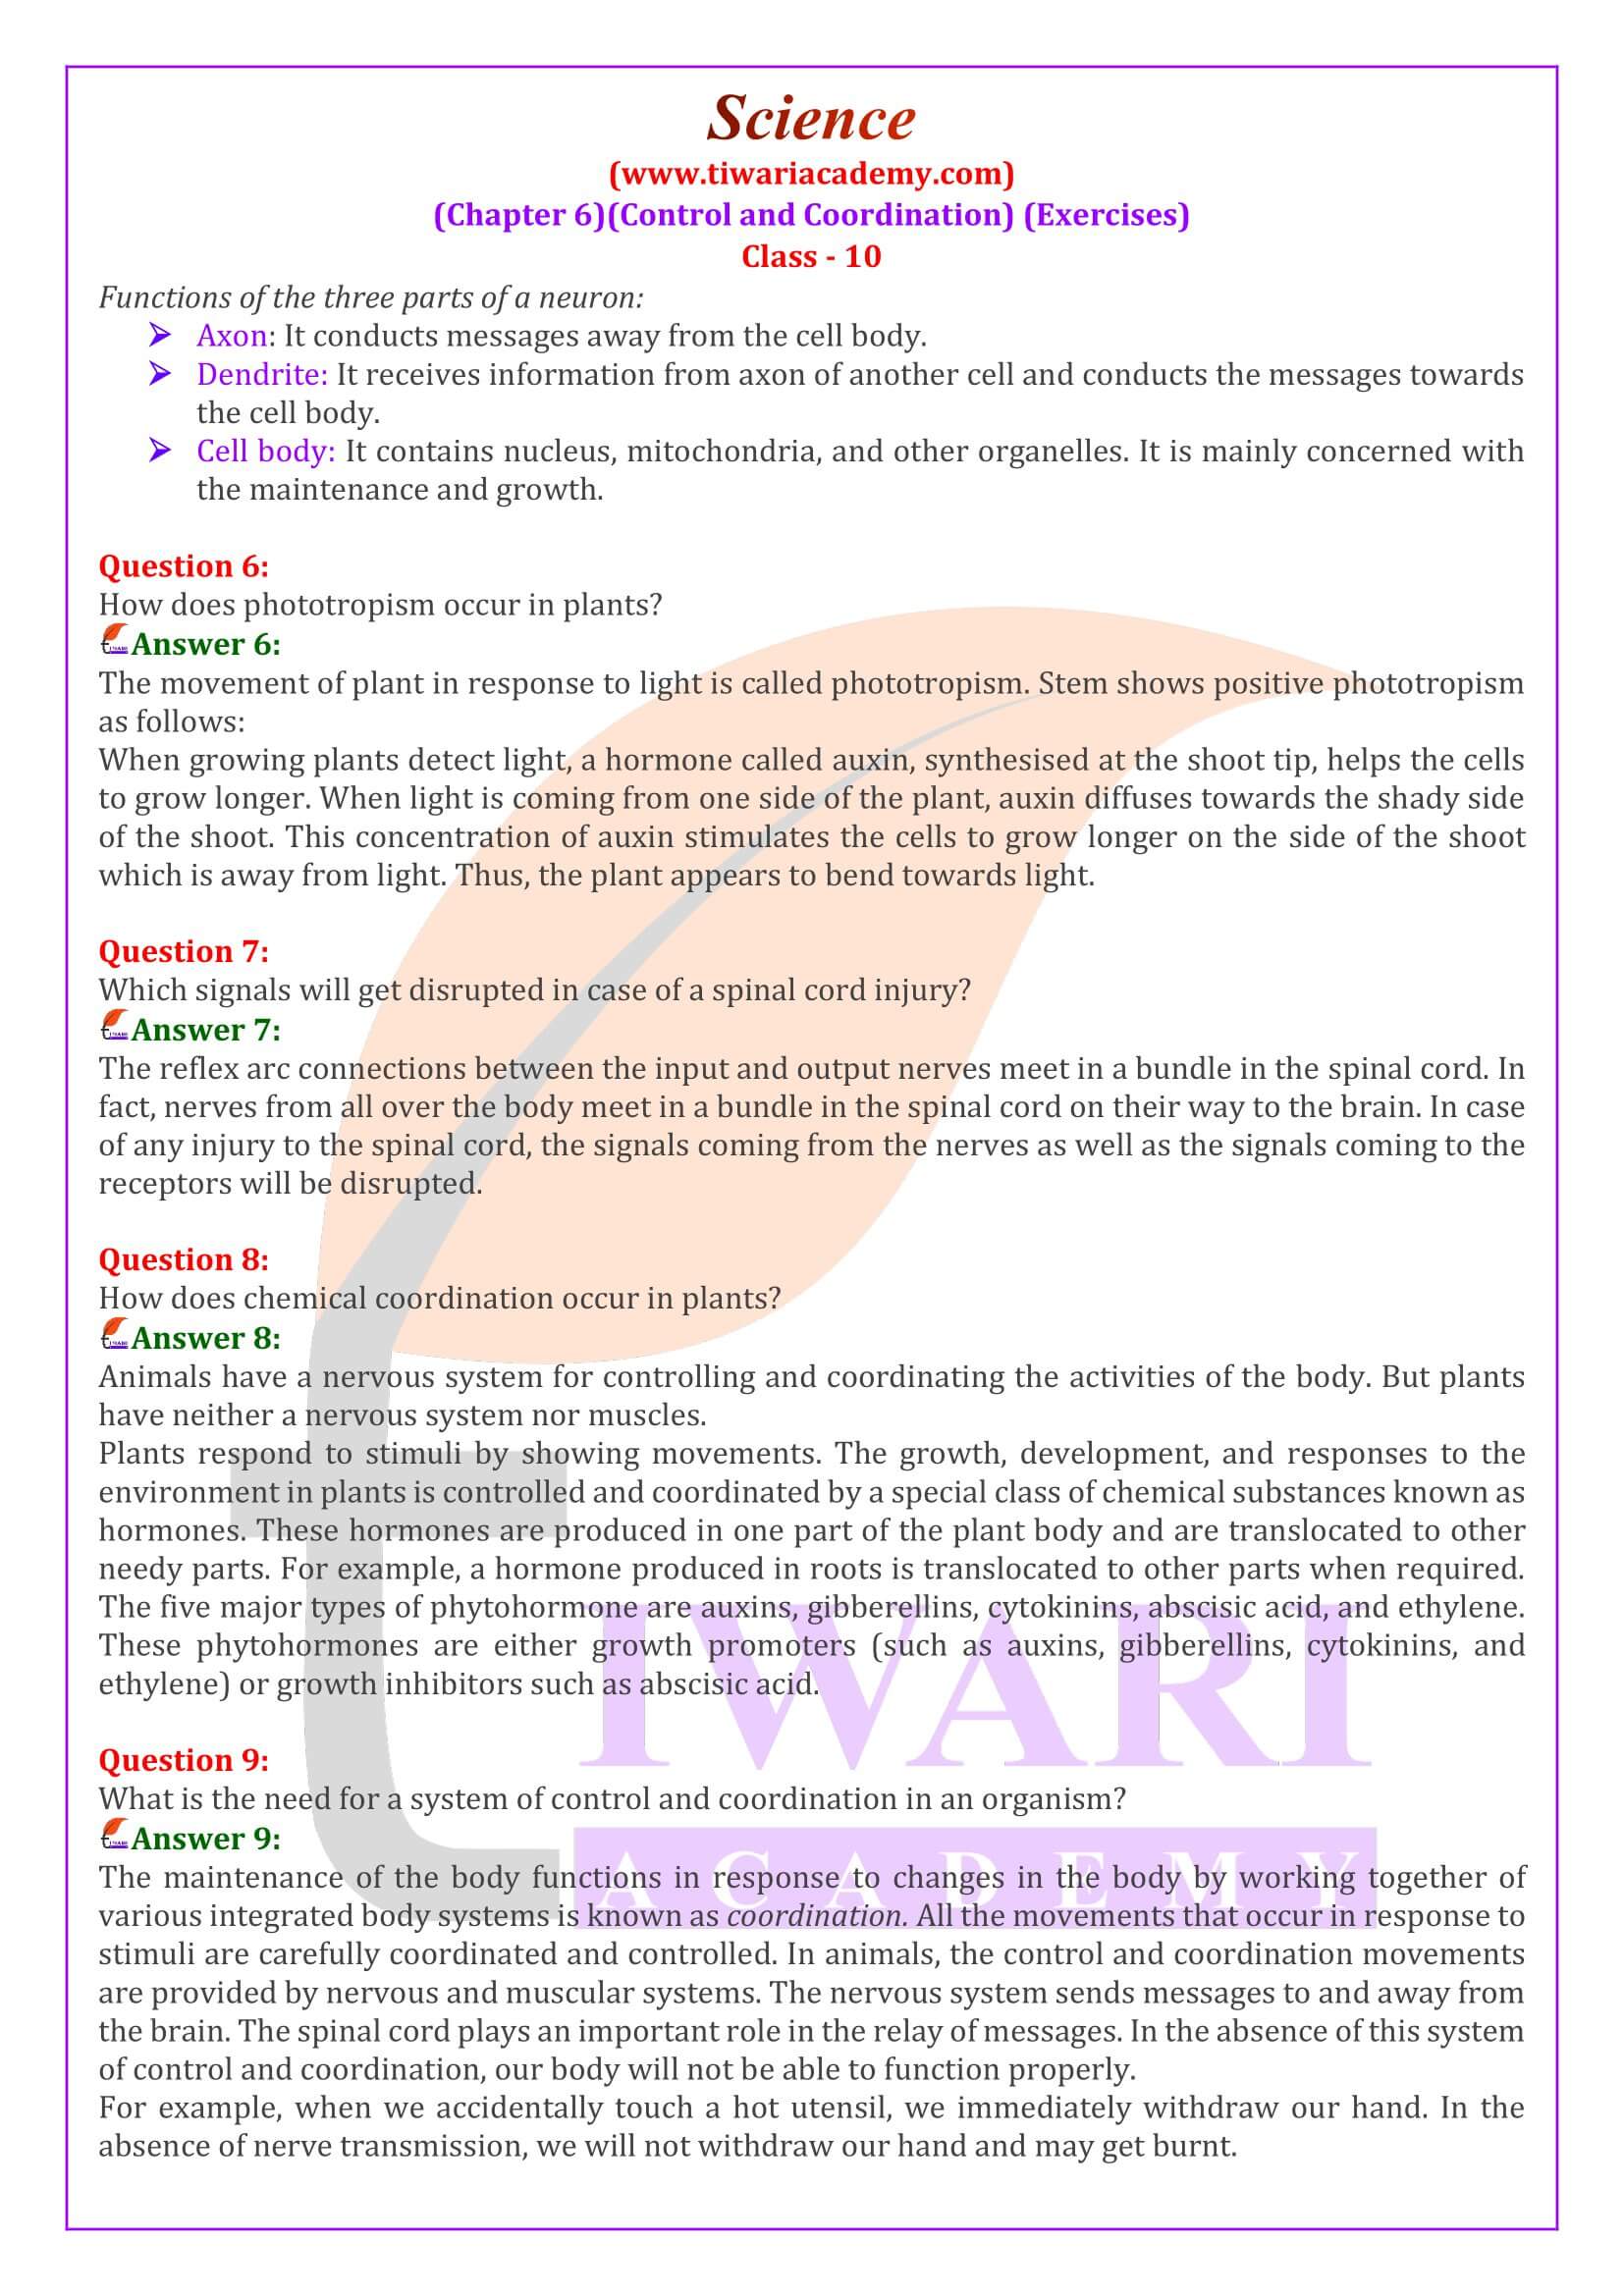 NCERT Solutions for Class 10 Science Chapter 6